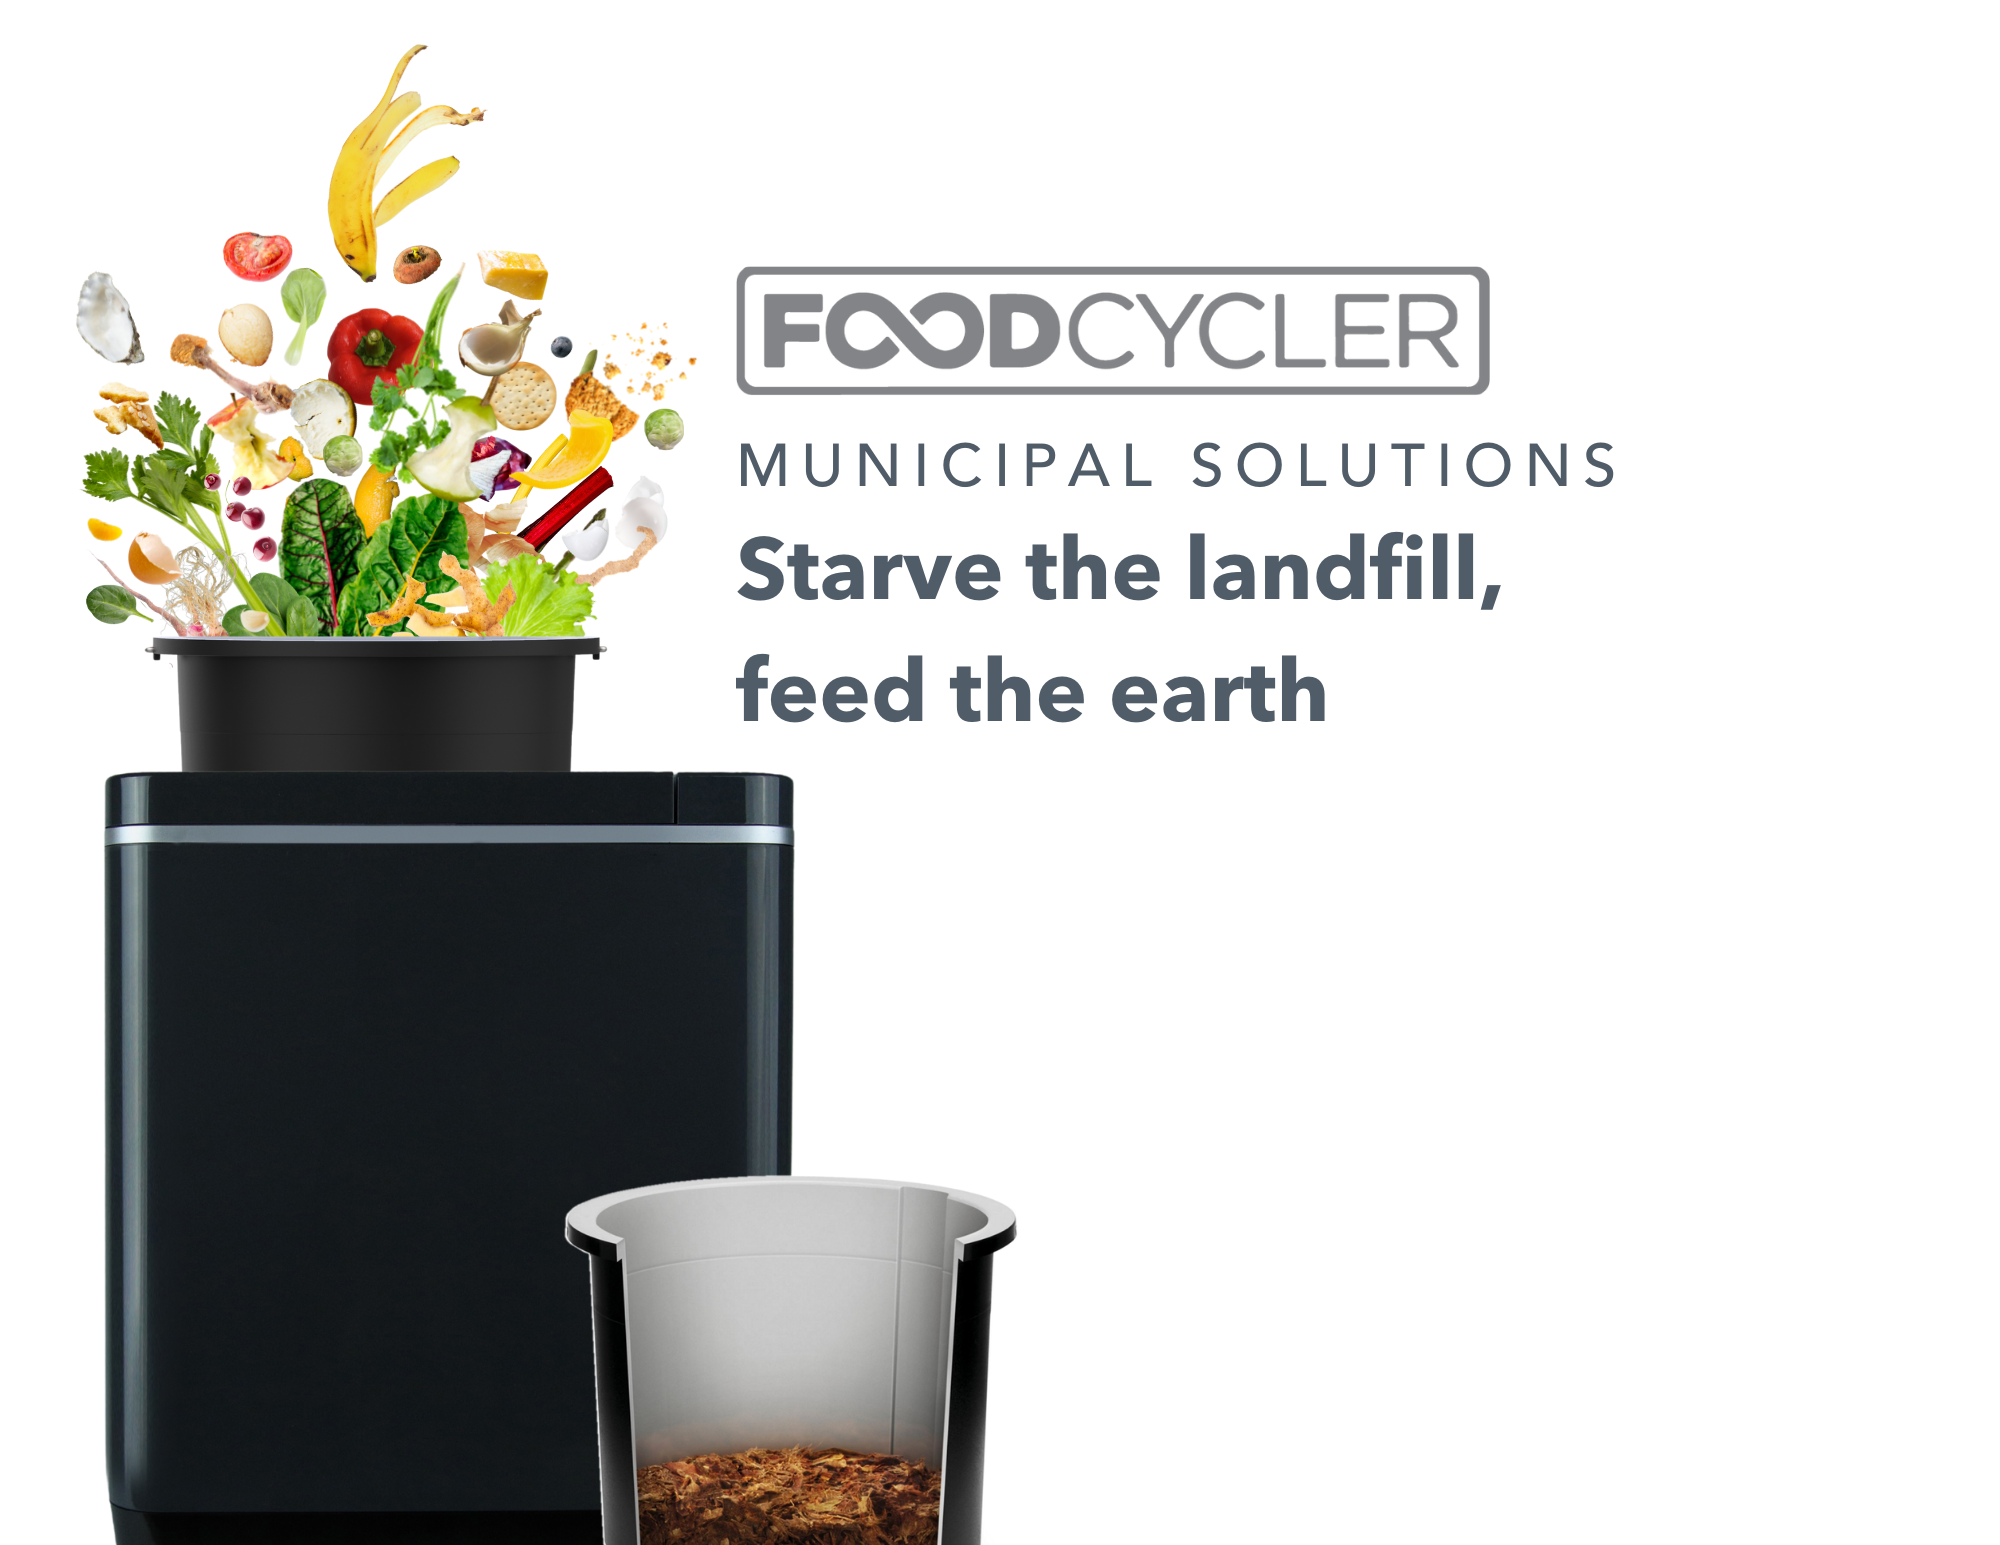 Food is shown funneling into a FoodCycler with caption "Municipal solutions. Starve the landfill, feed the earth"